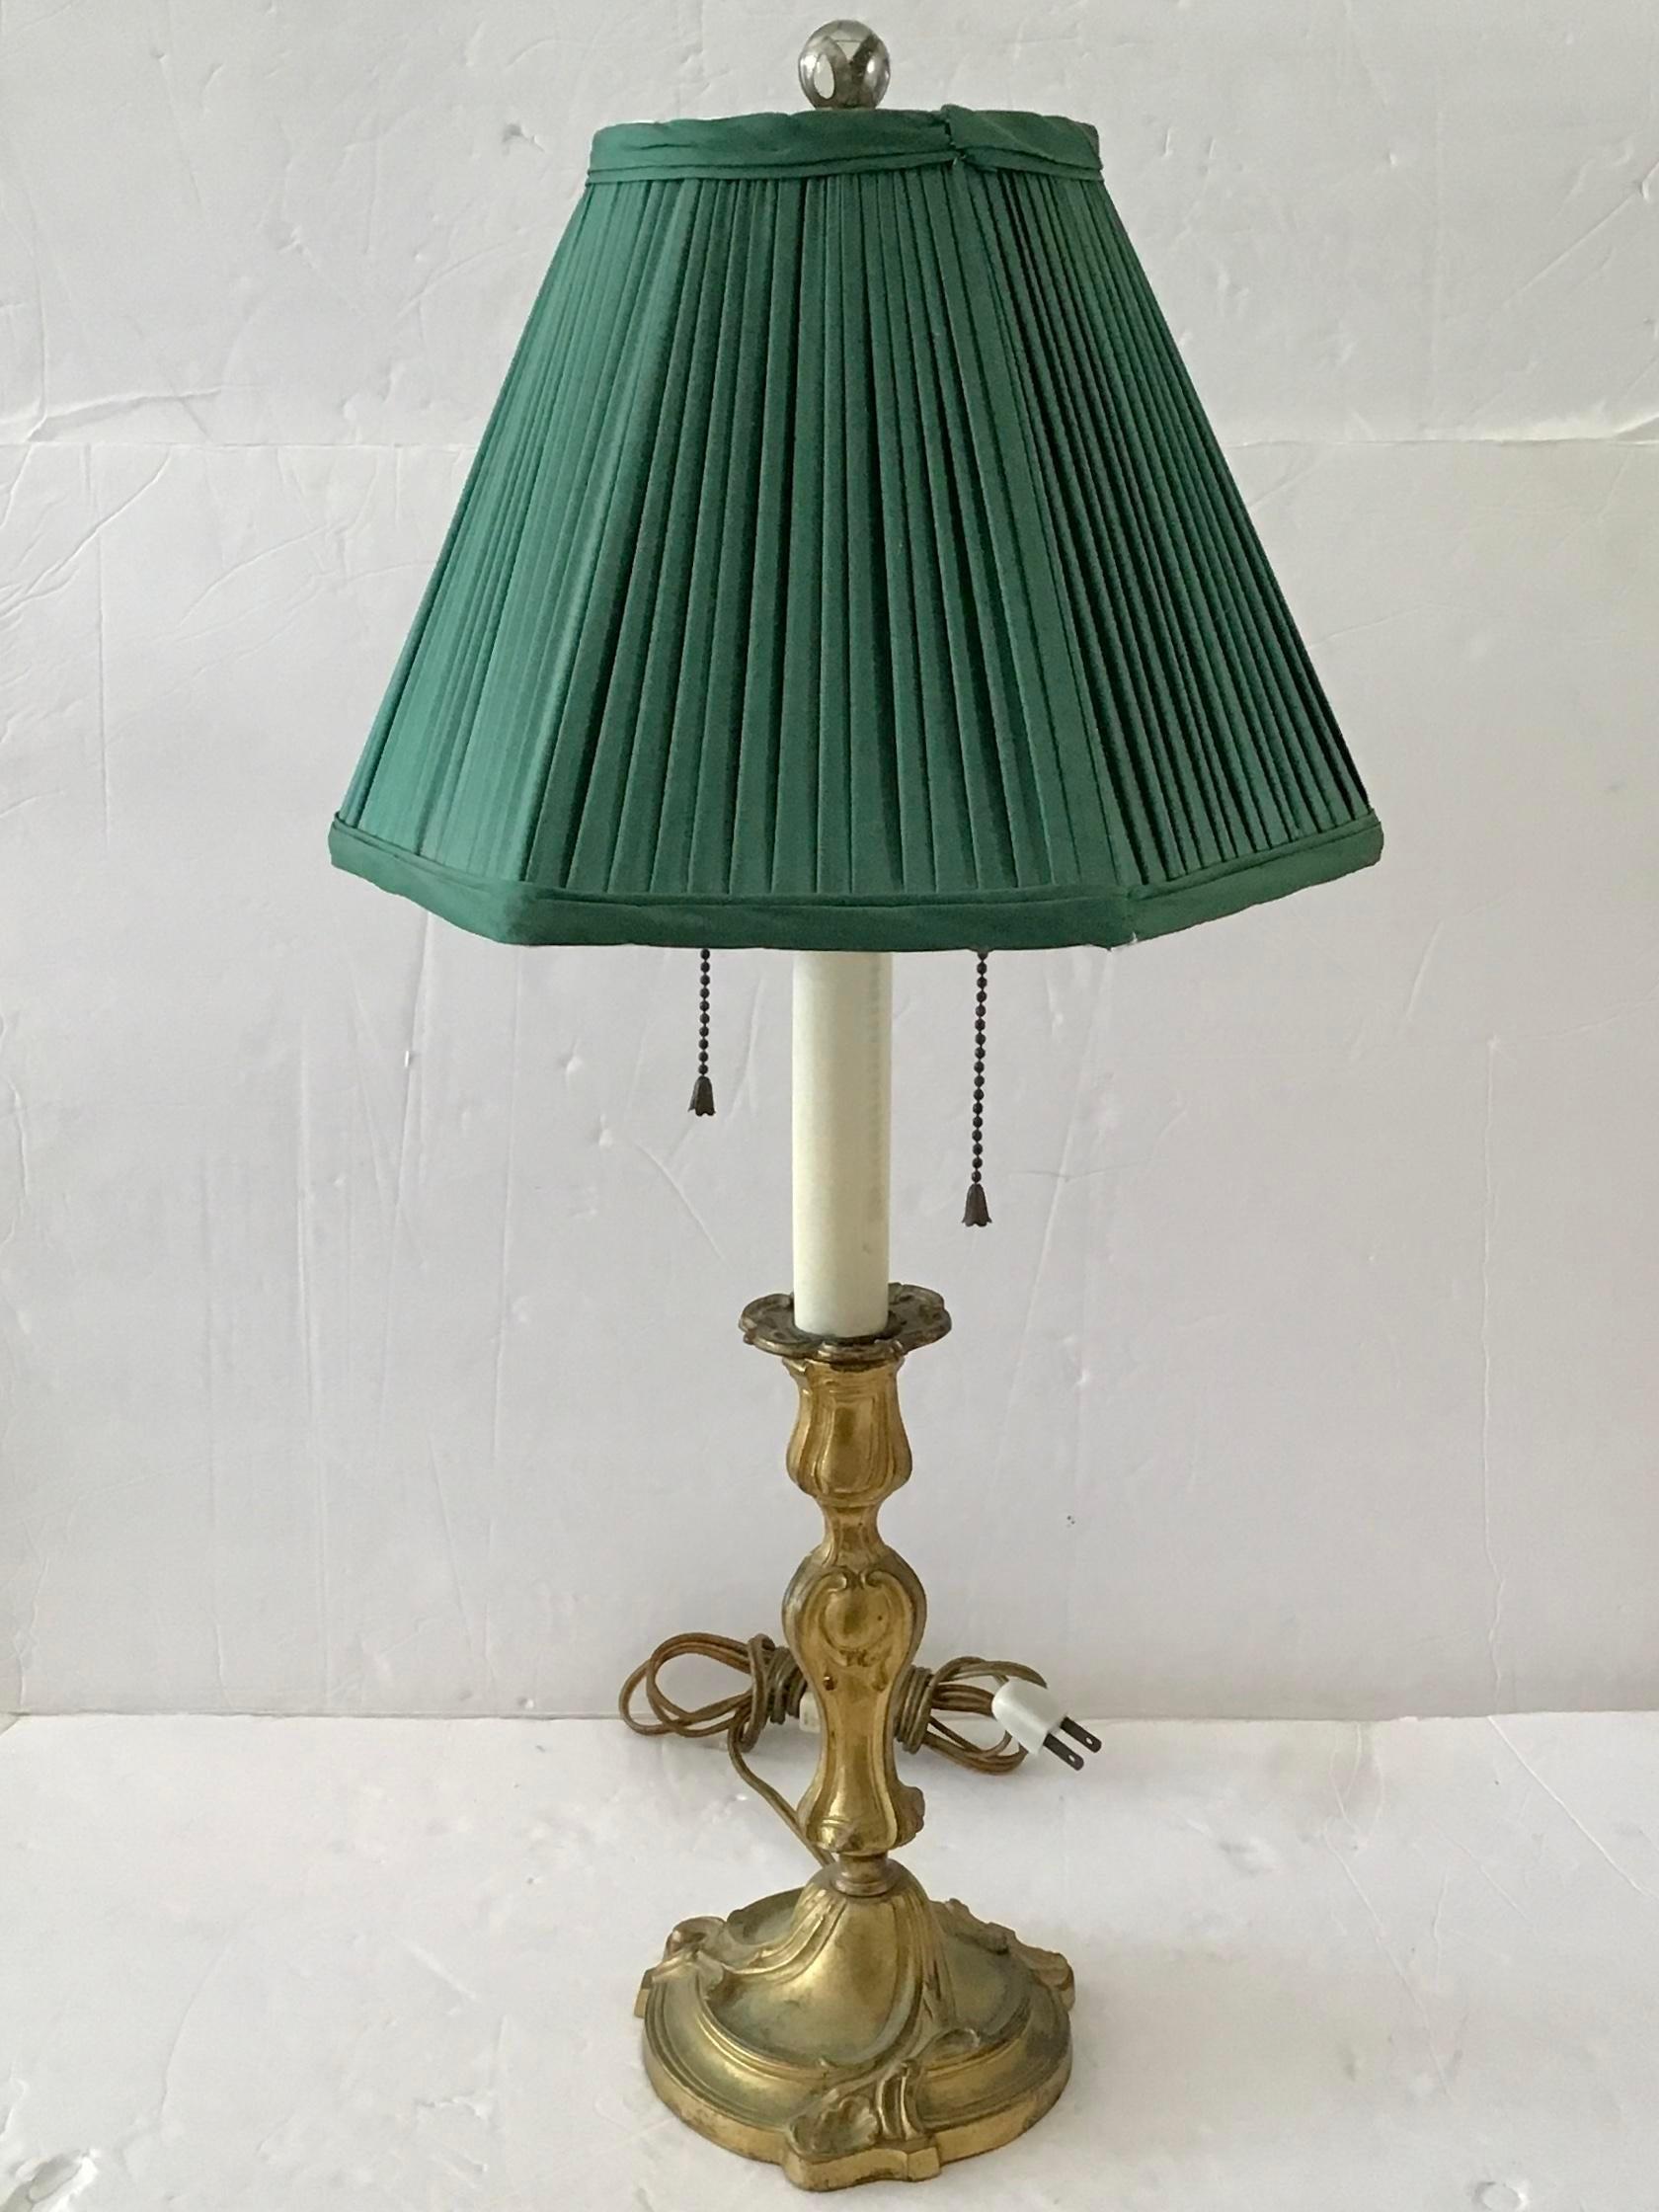 Beautiful French Gilt bronze table lamp with Green fabric shade. Gorgeous details with nice gilt tone. Add some French style to your home.